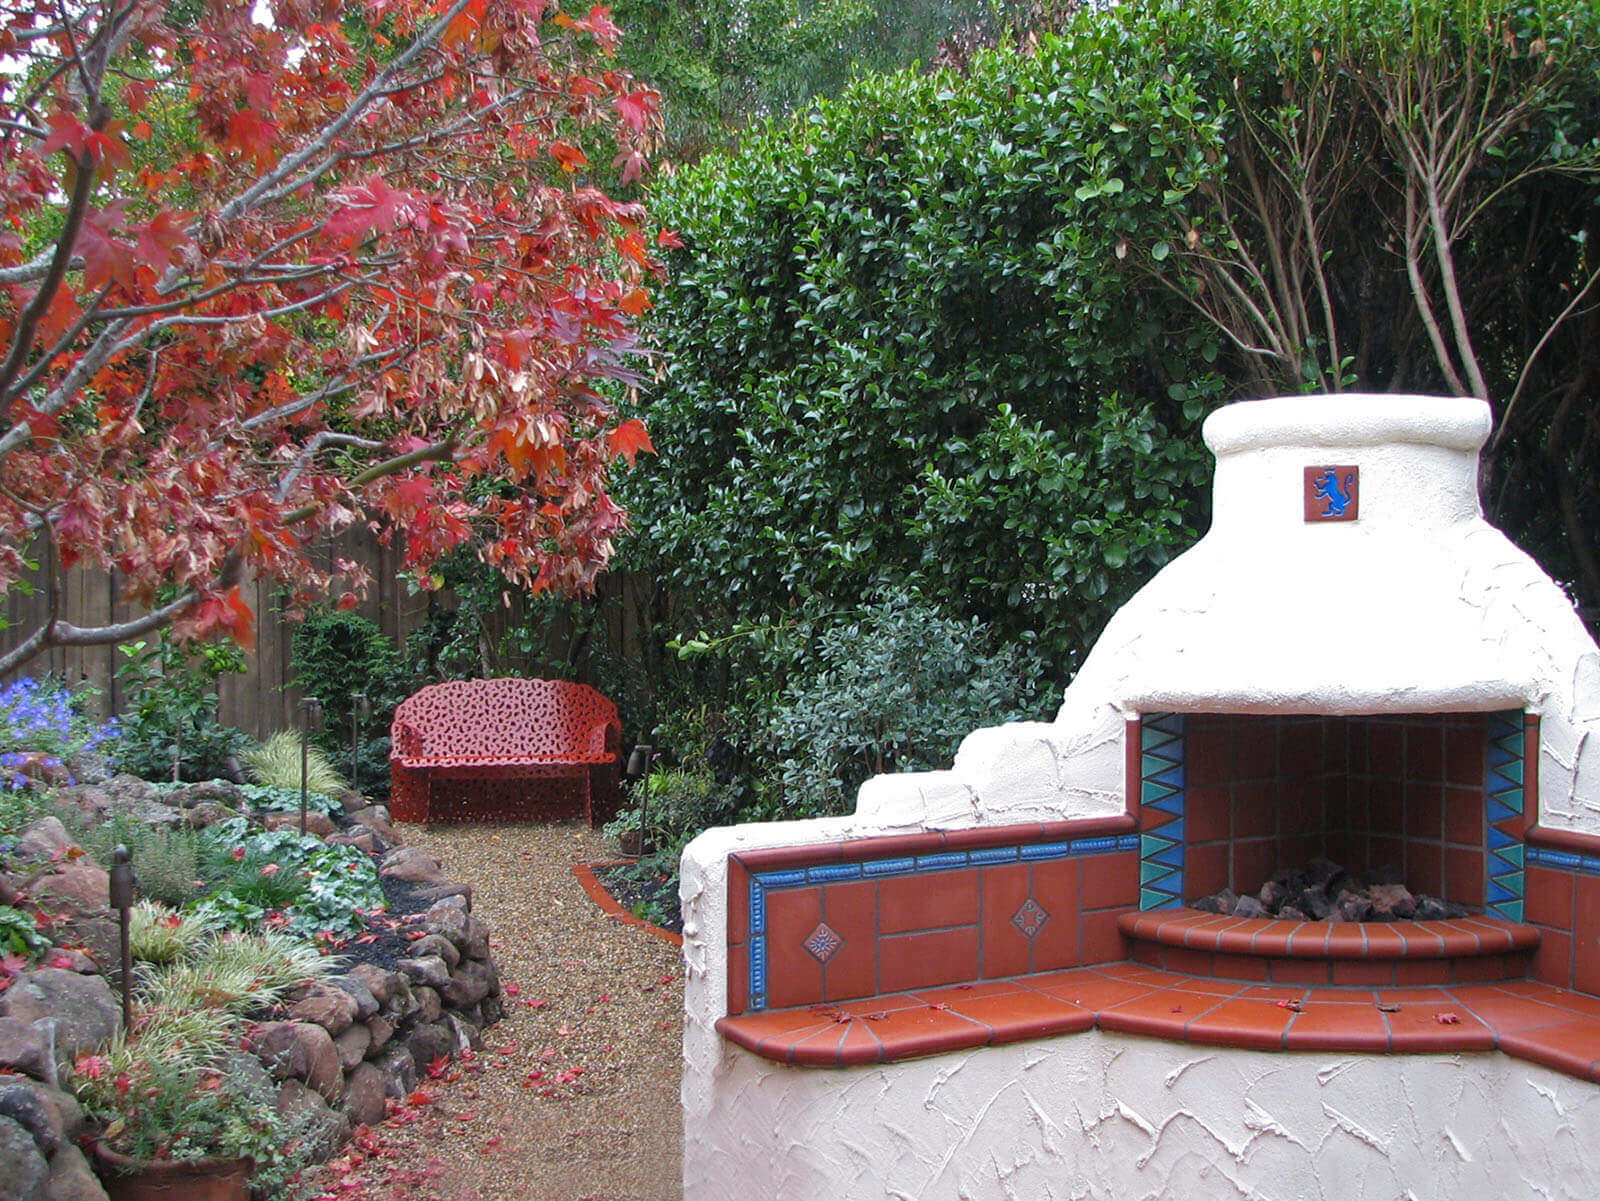 Mission-style stucco fireplace with tiled hearth and red accents in an autumn landscape